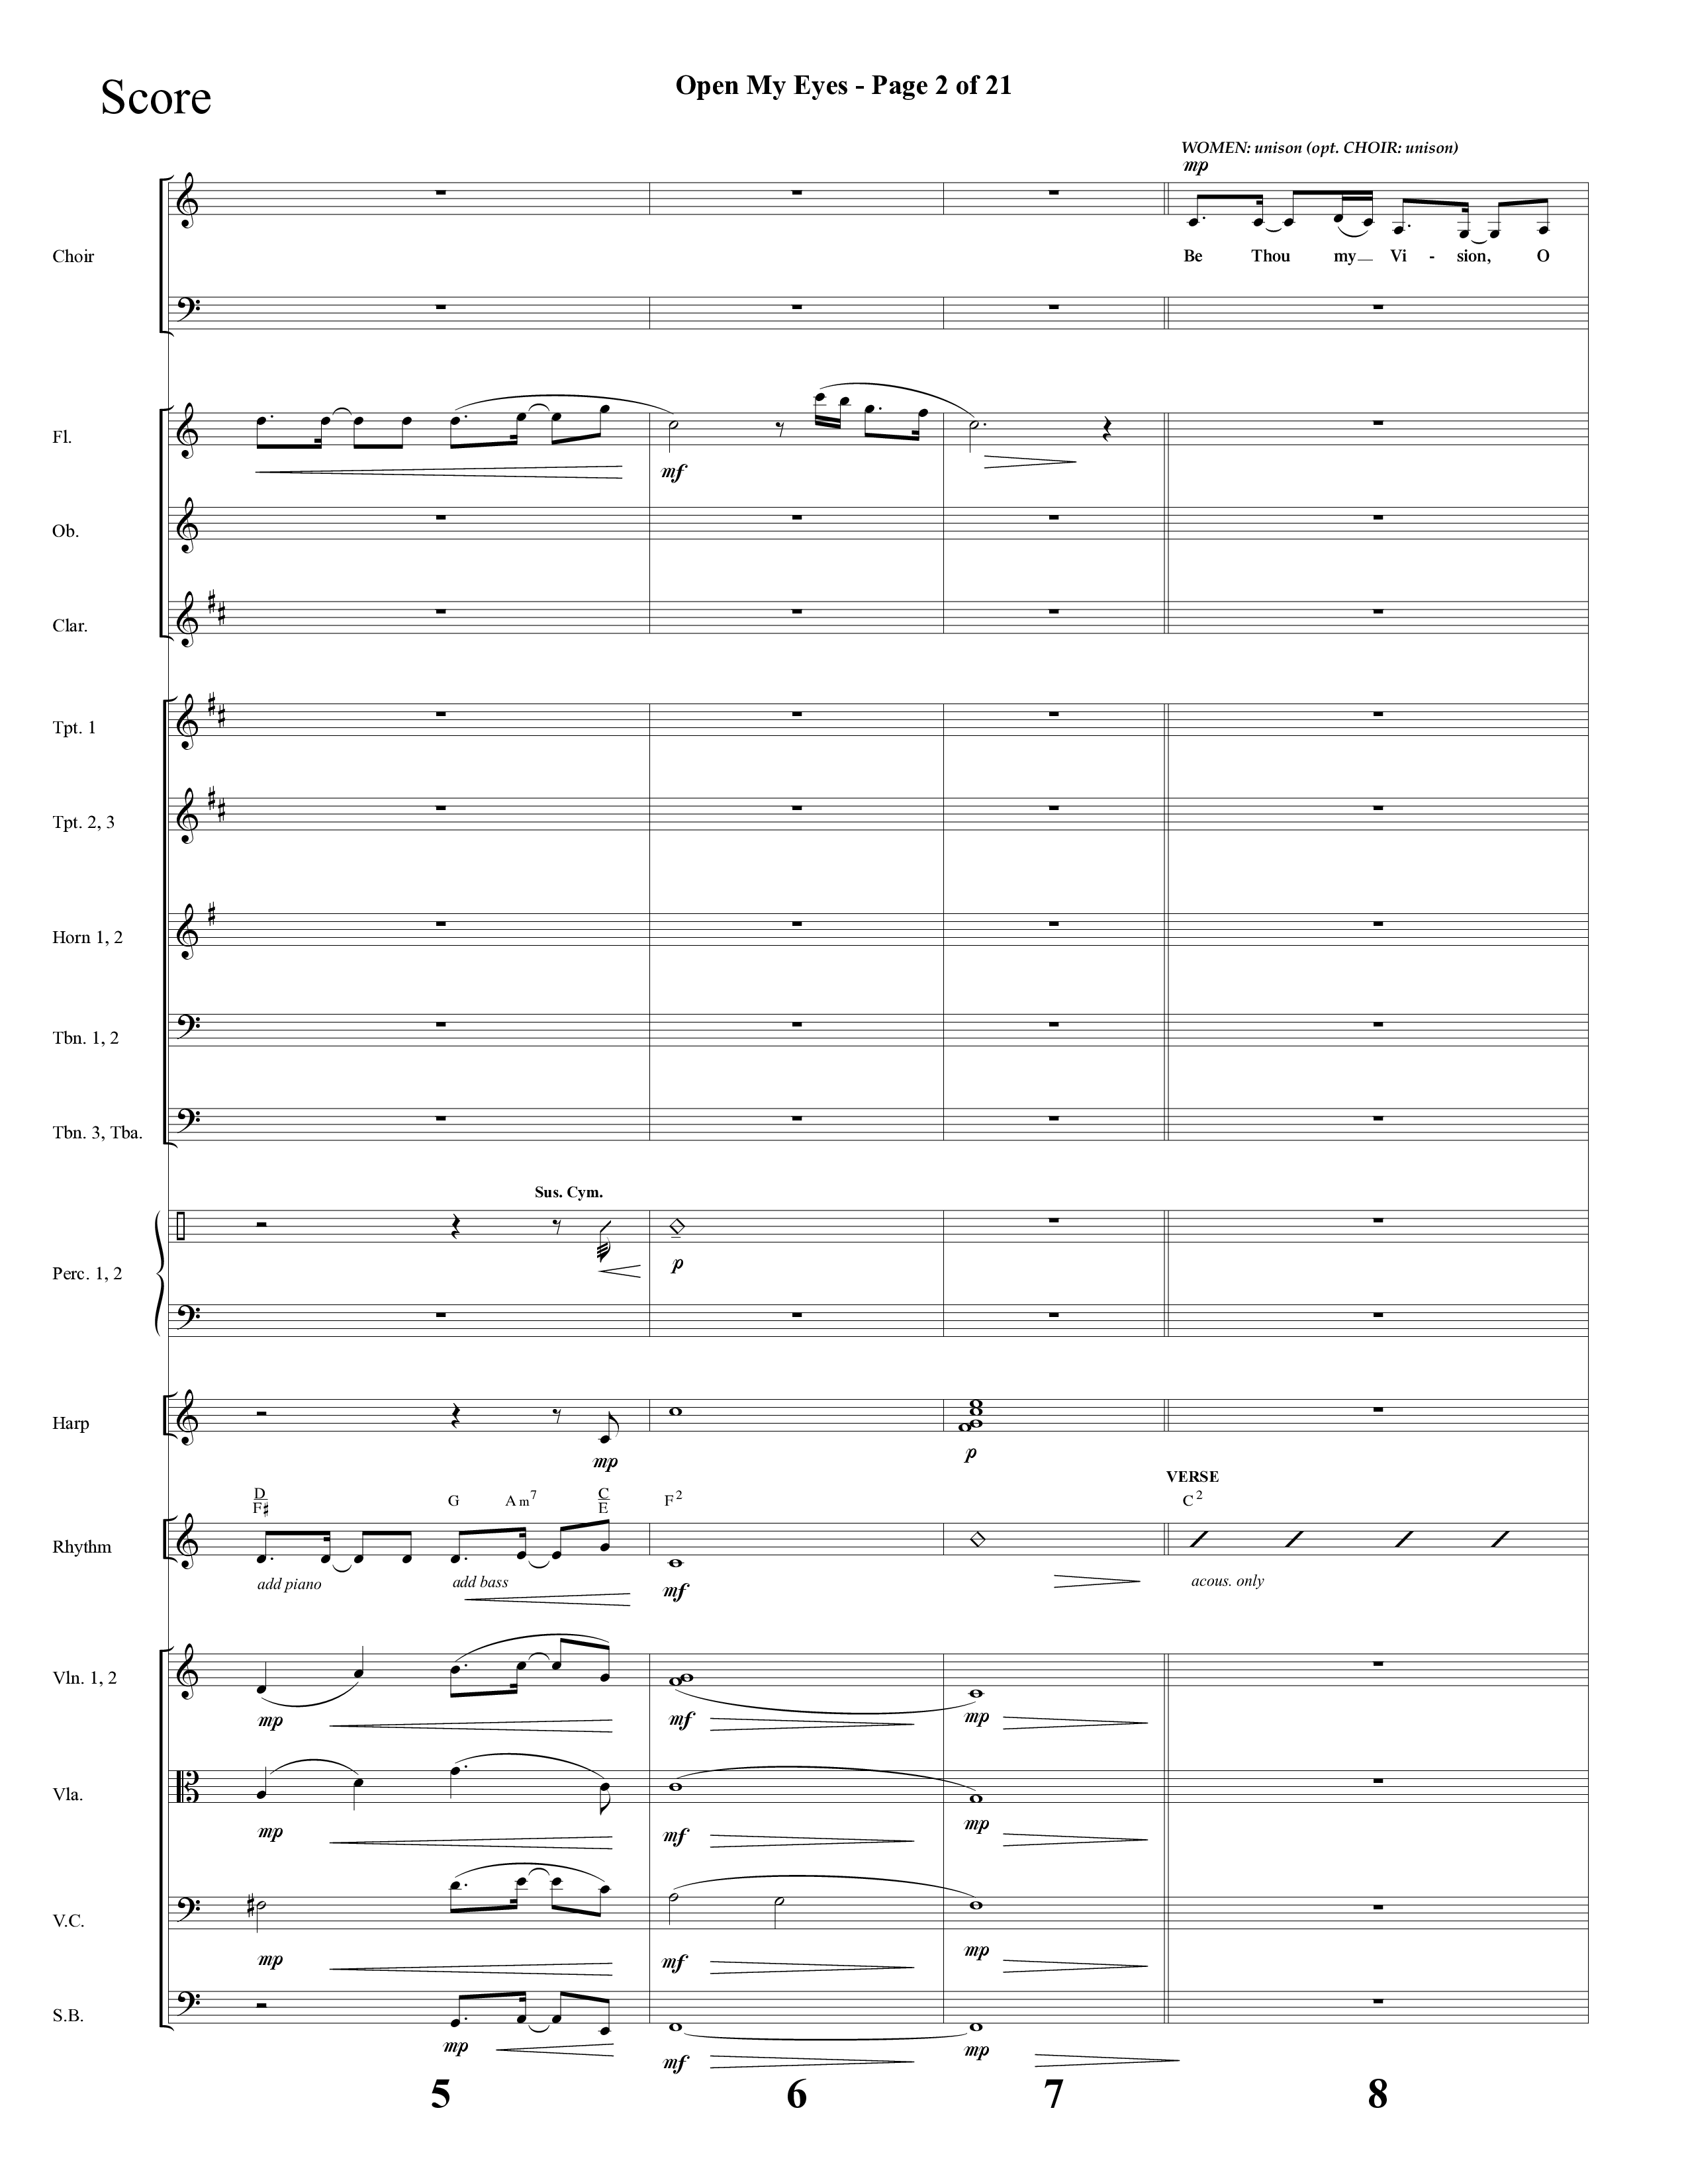 Open My Eyes (with Be Thou My Vision) (Choral Anthem SATB) Conductor's Score (Arr. Cliff Duren / Lifeway Choral)